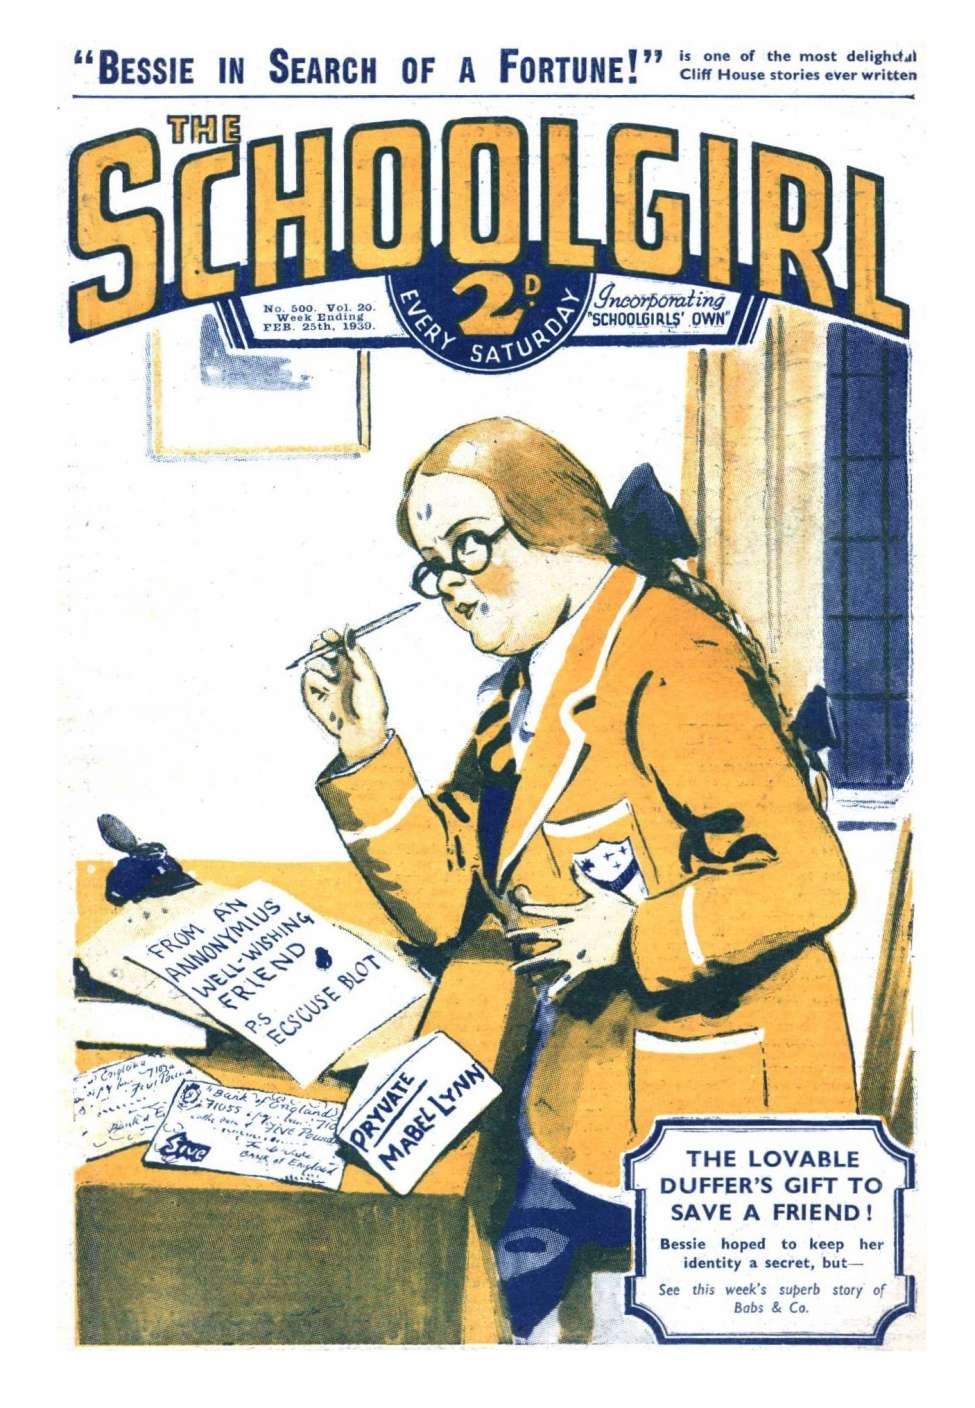 Book Cover For The Schoolgirl 500